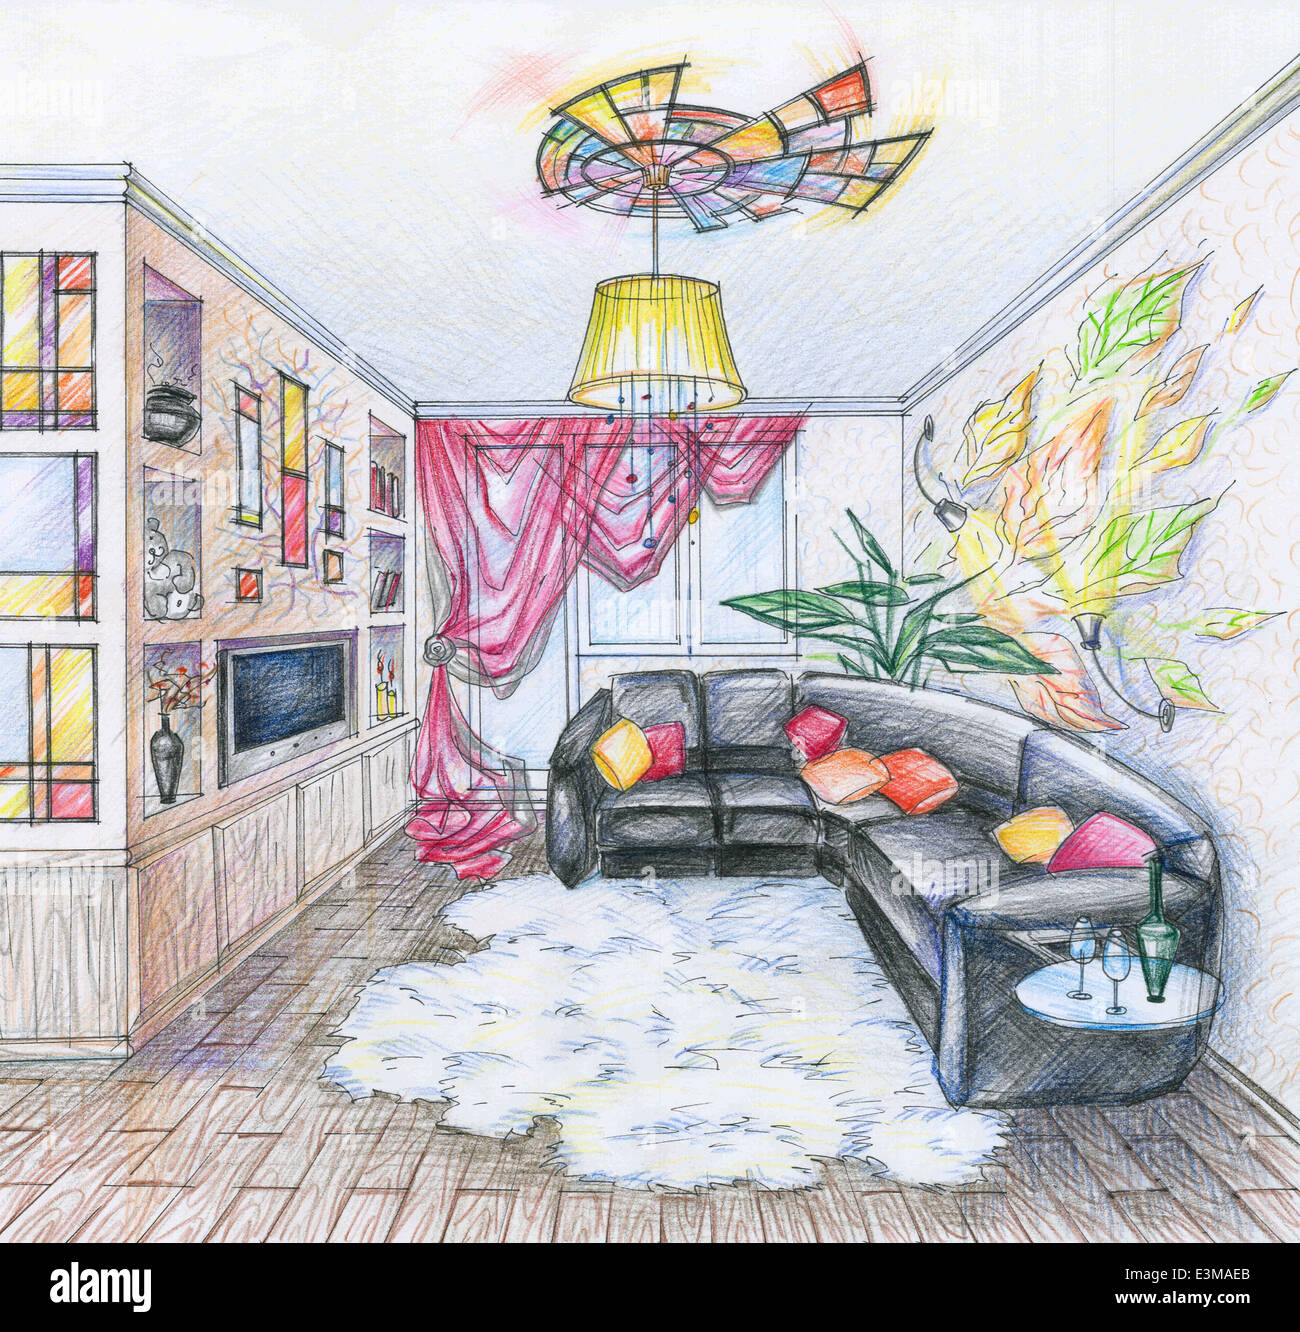 Sketch of interior of living room Stock Photo